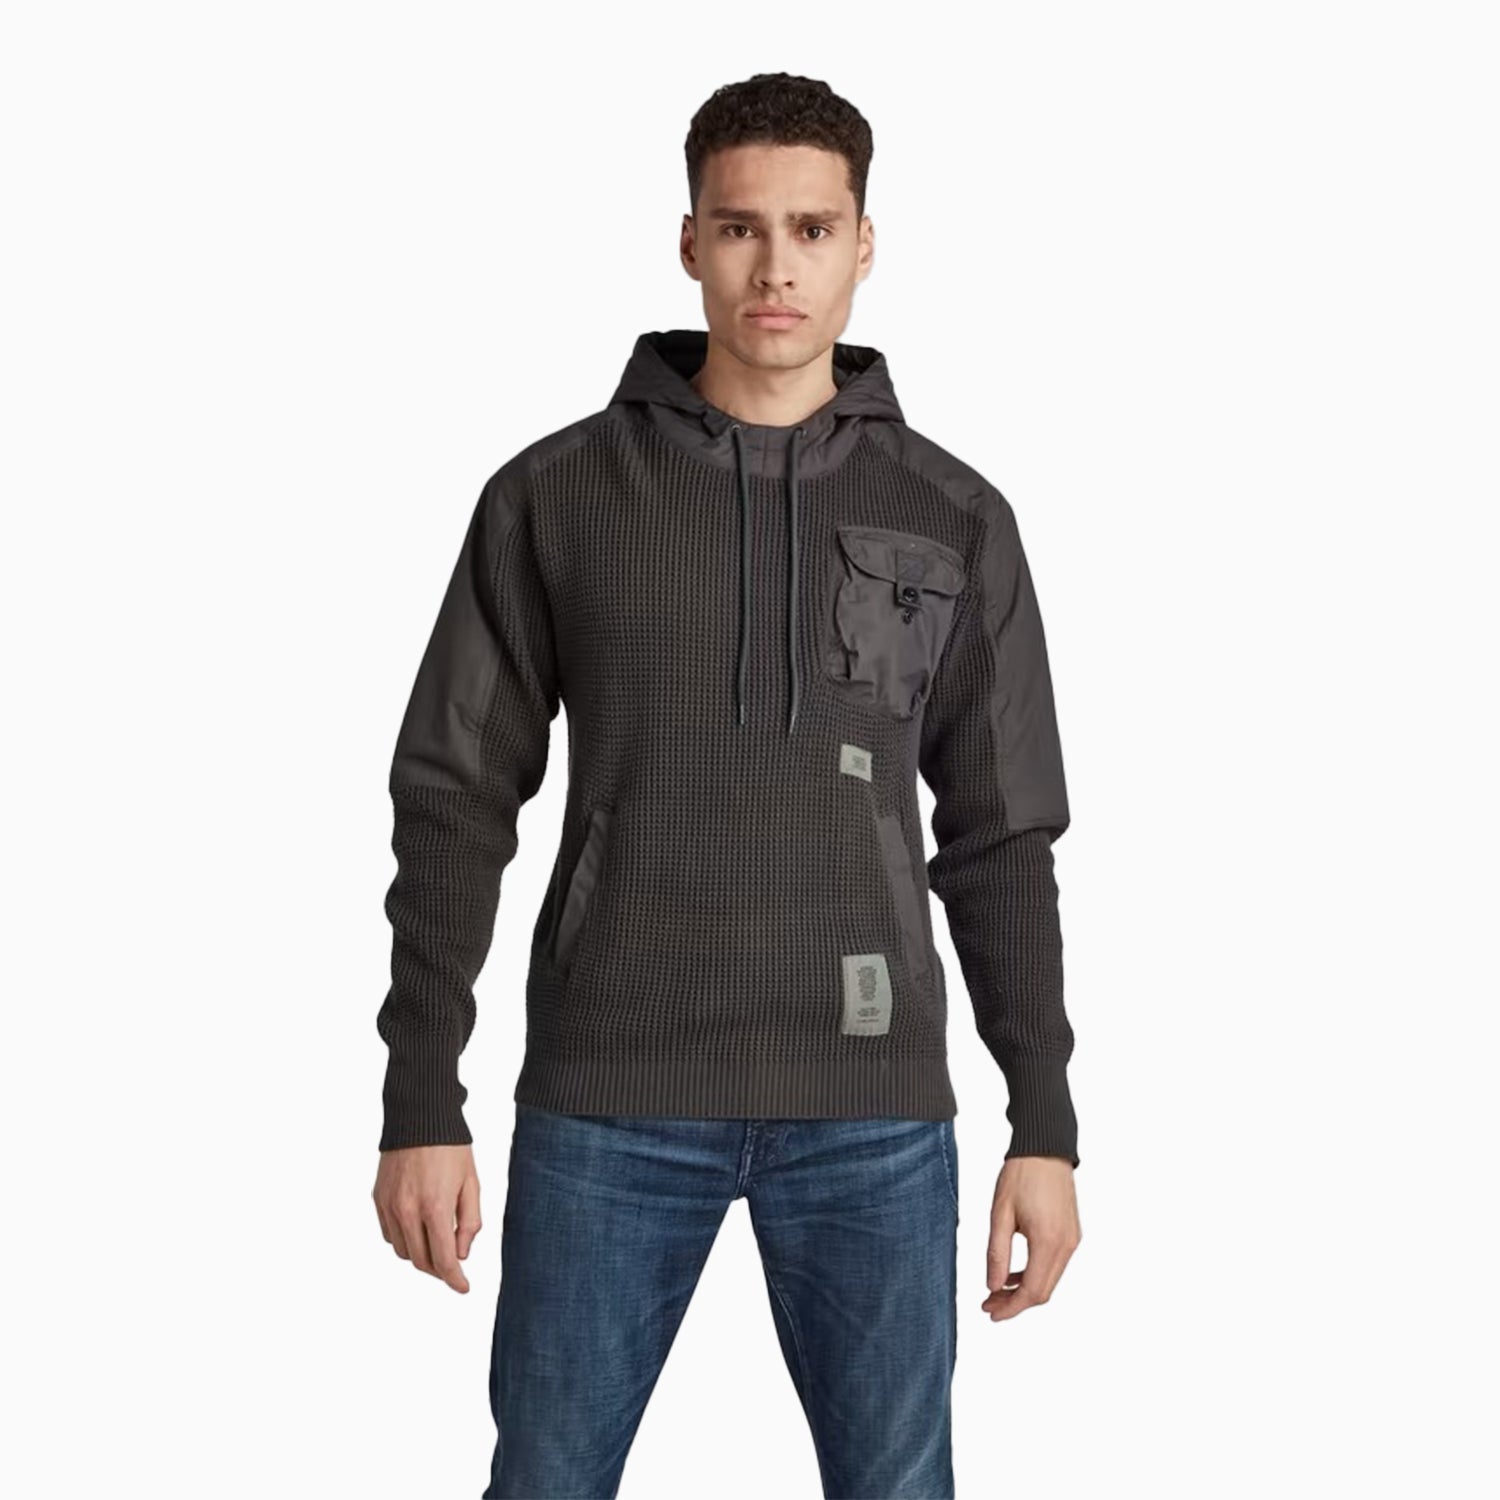 g-star-raw-mens-woven-mix-knit-hoodie-d20681-c868-5812